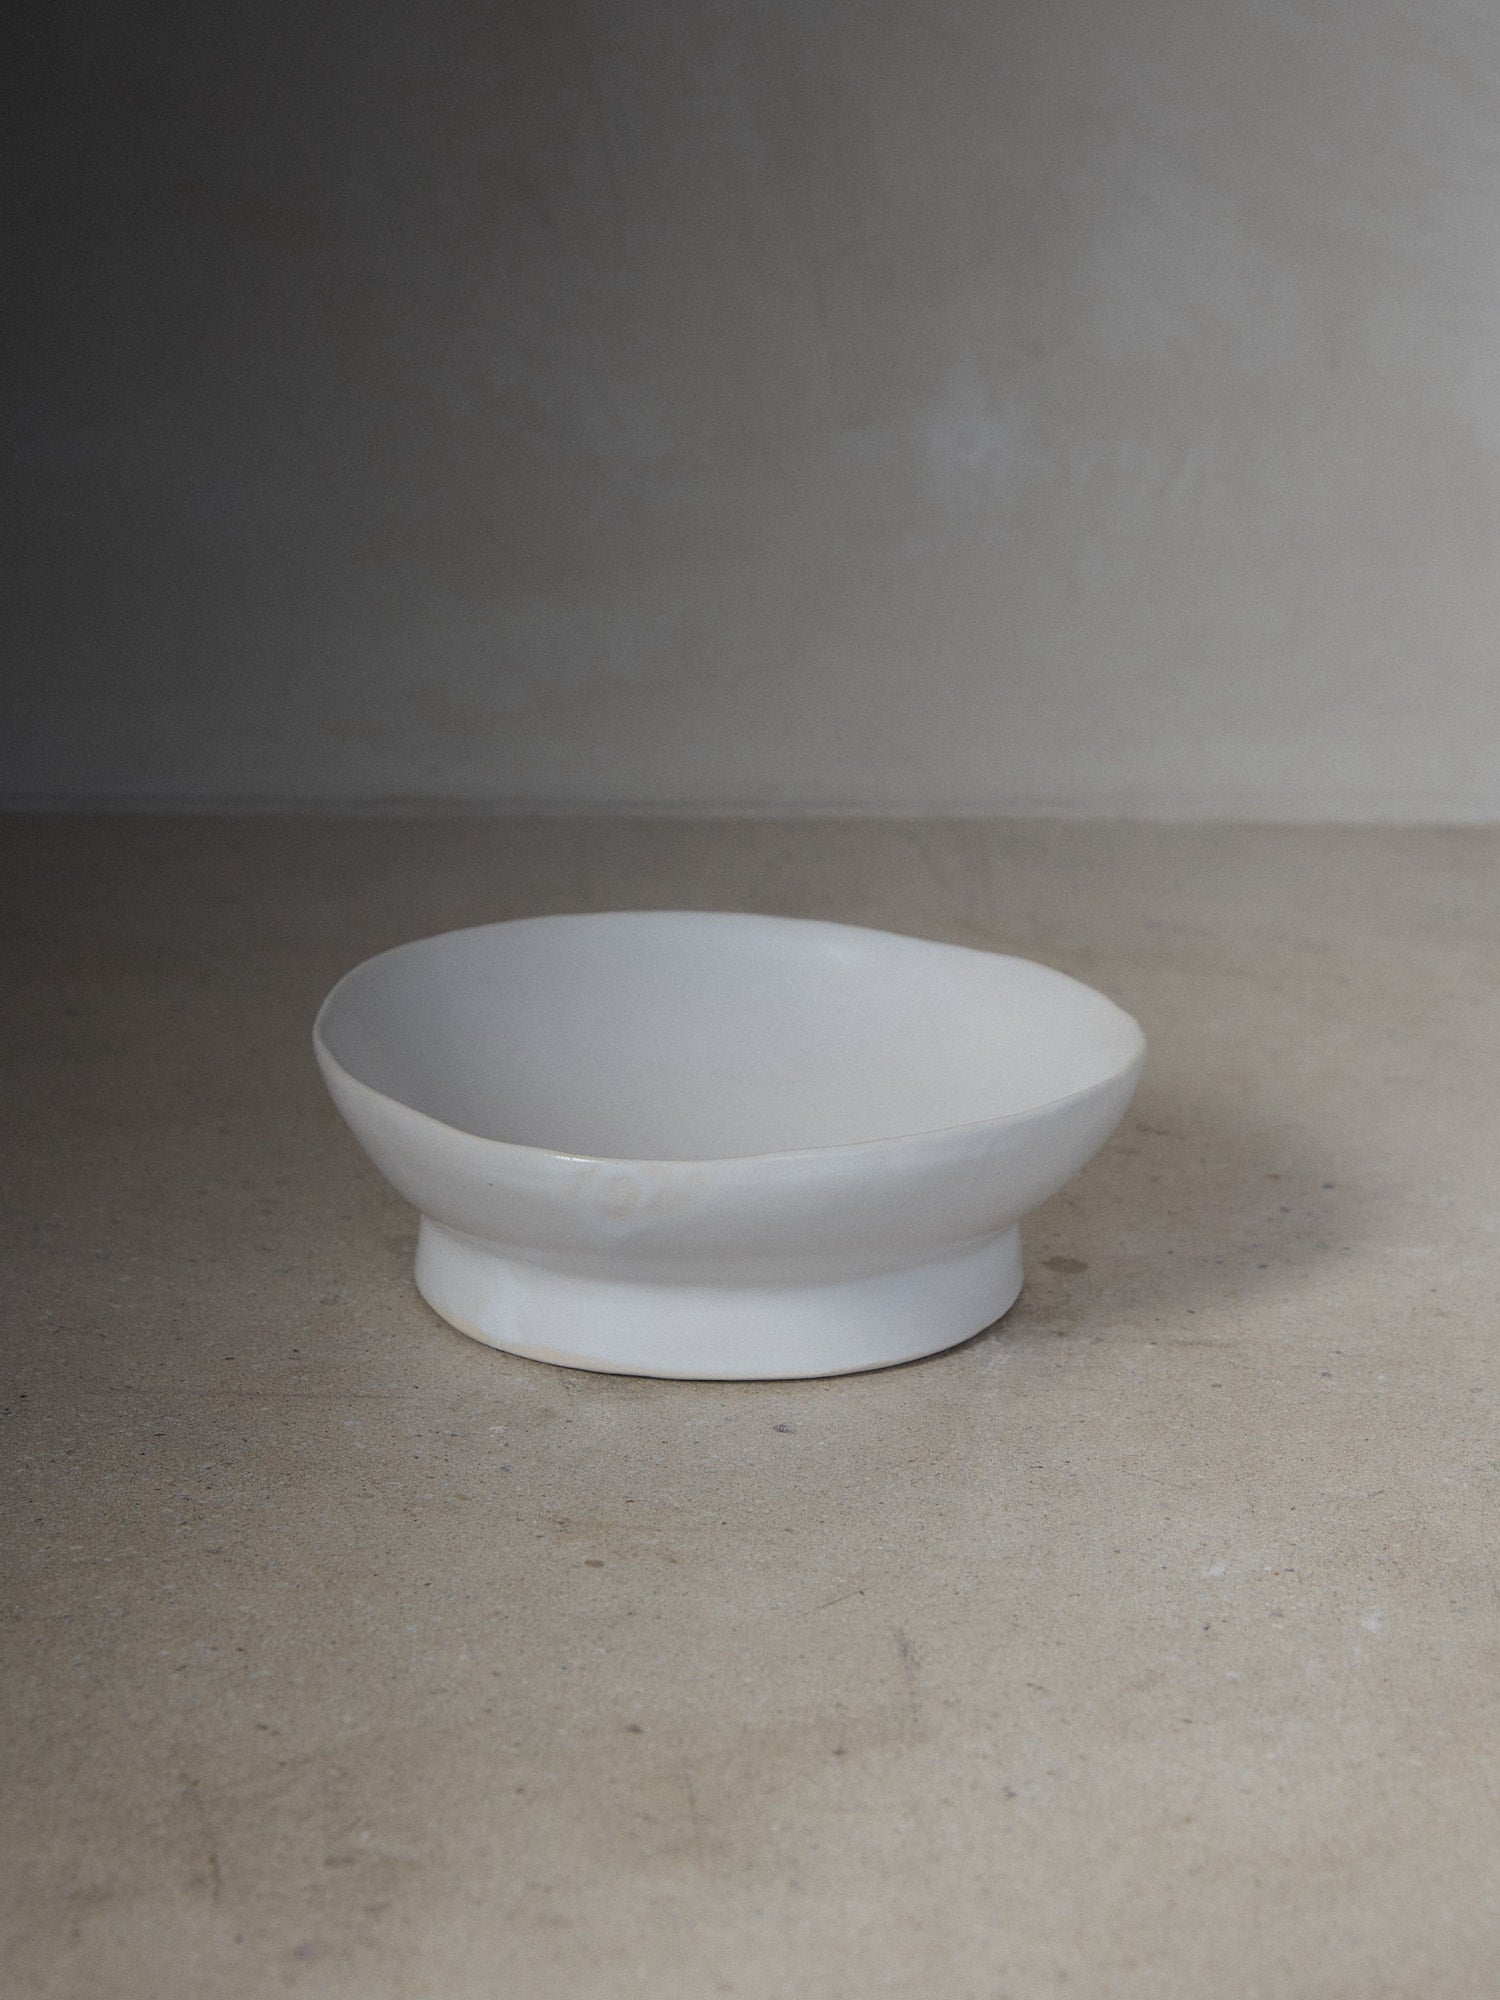 çRaw Small Footed Platter. A hand-formed rimmed platter recalling the natural world with perfectly imperfect edges atop a solid, footed base in versatile matte white stoneware.